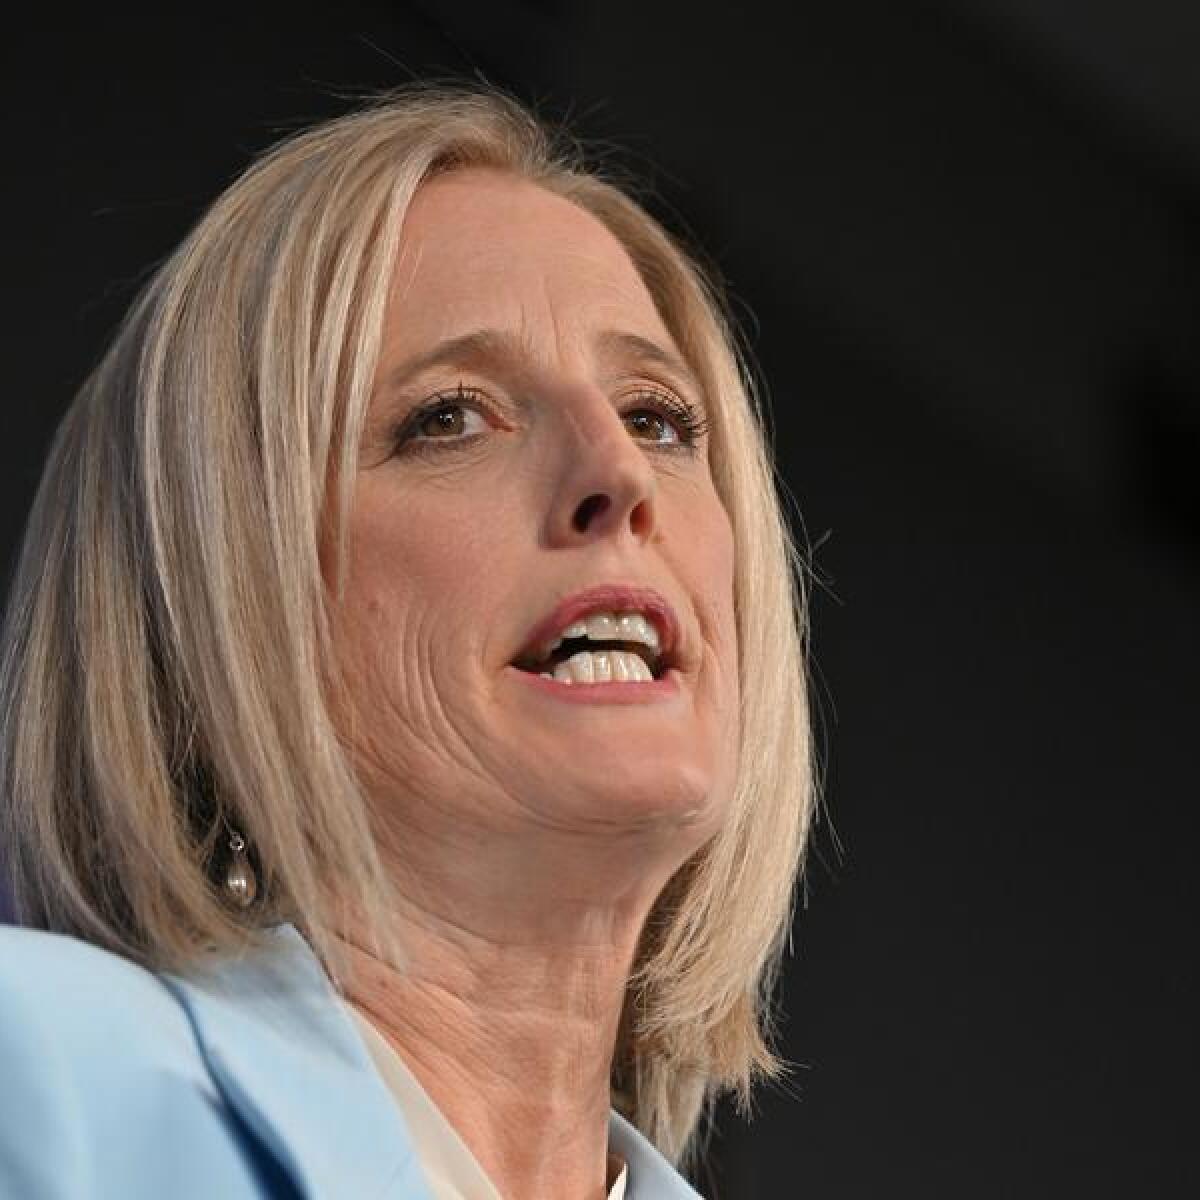 Minister for Finance Katy Gallagher.